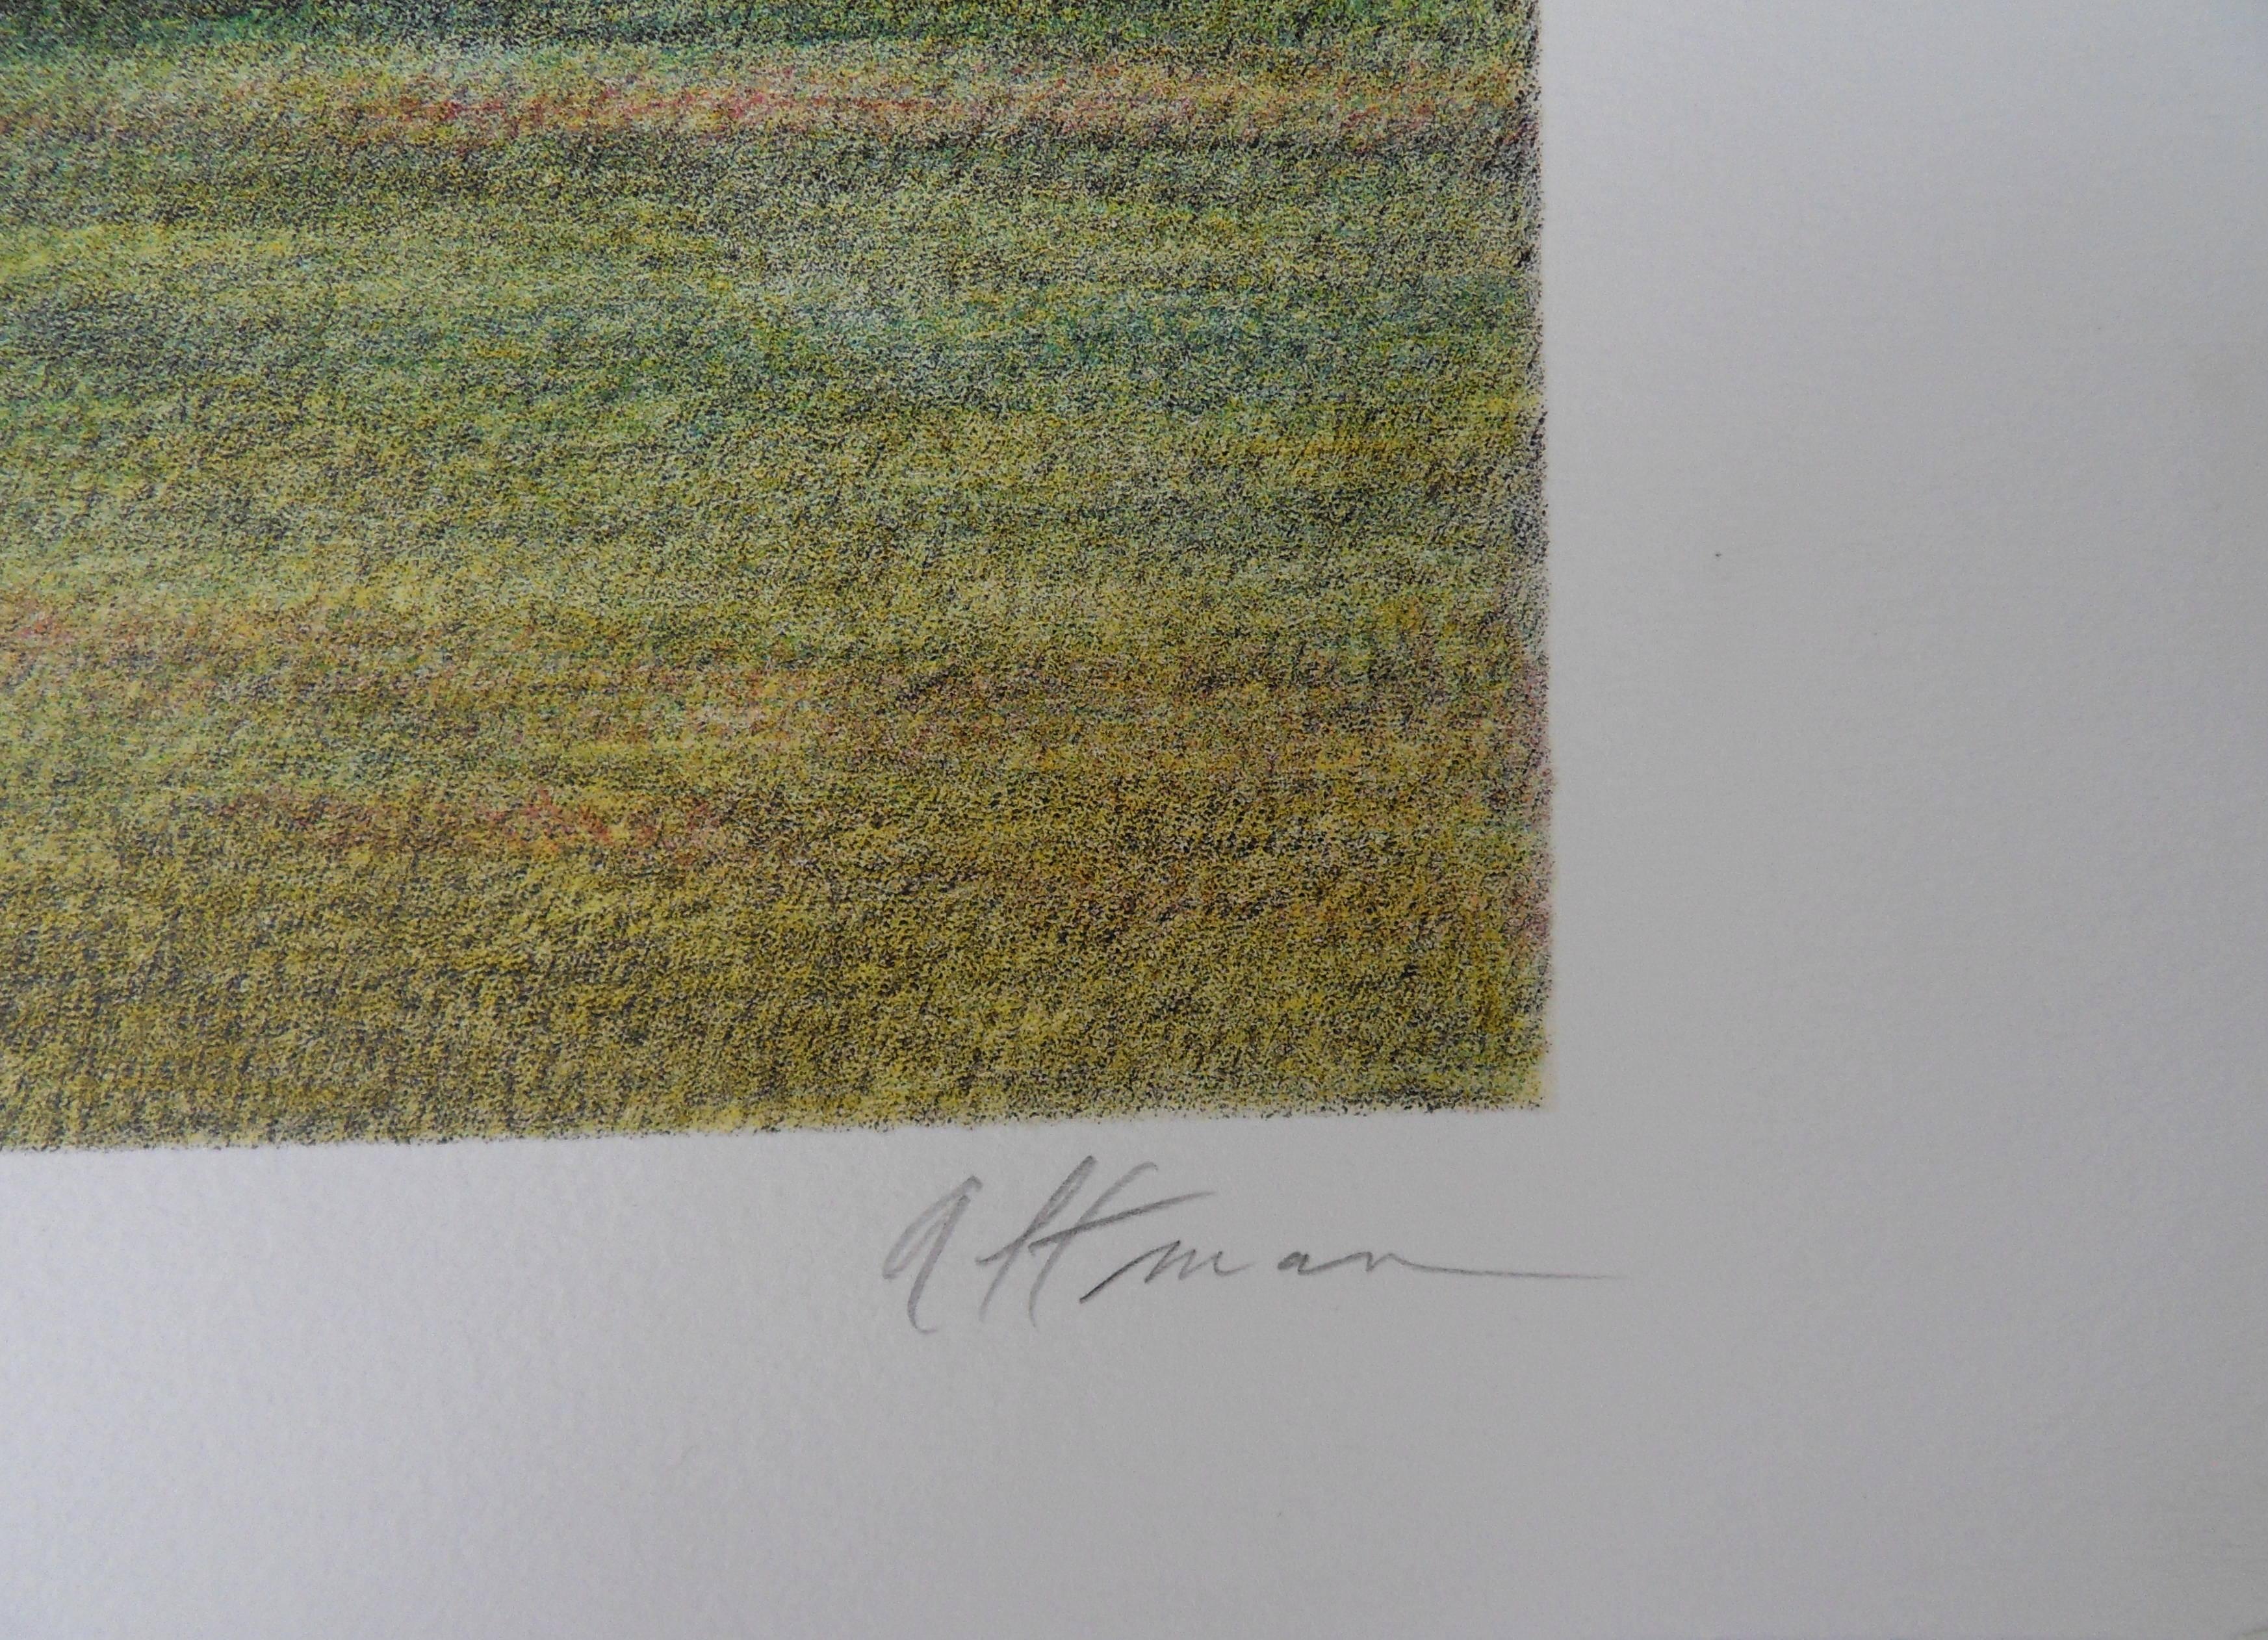 New York : Fall, Indian Summer in Central Park - Original handsigned lithograph - Print by Harold Altman